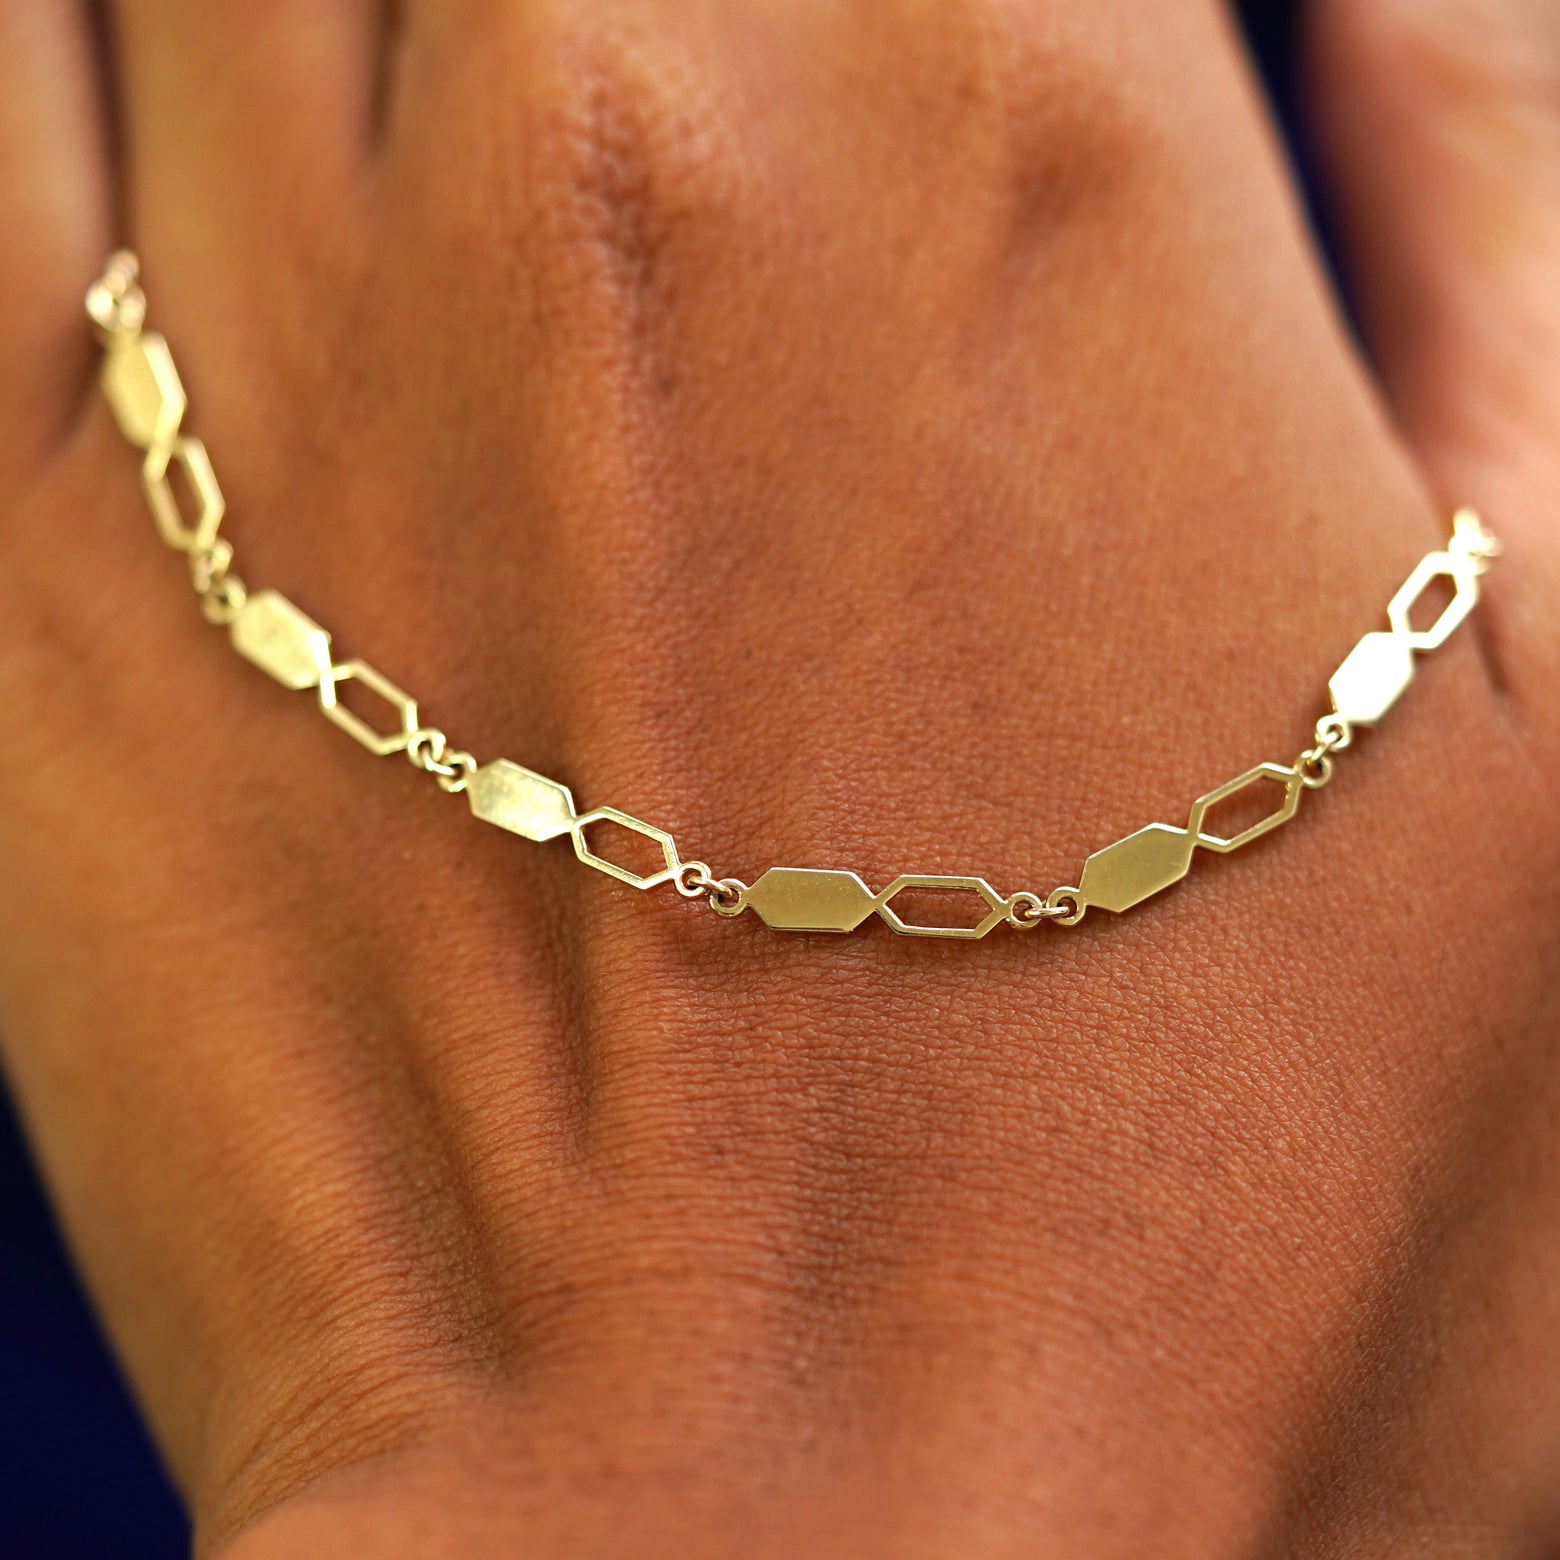 A solid gold Tanlah Chain resting on the back of a model's hand